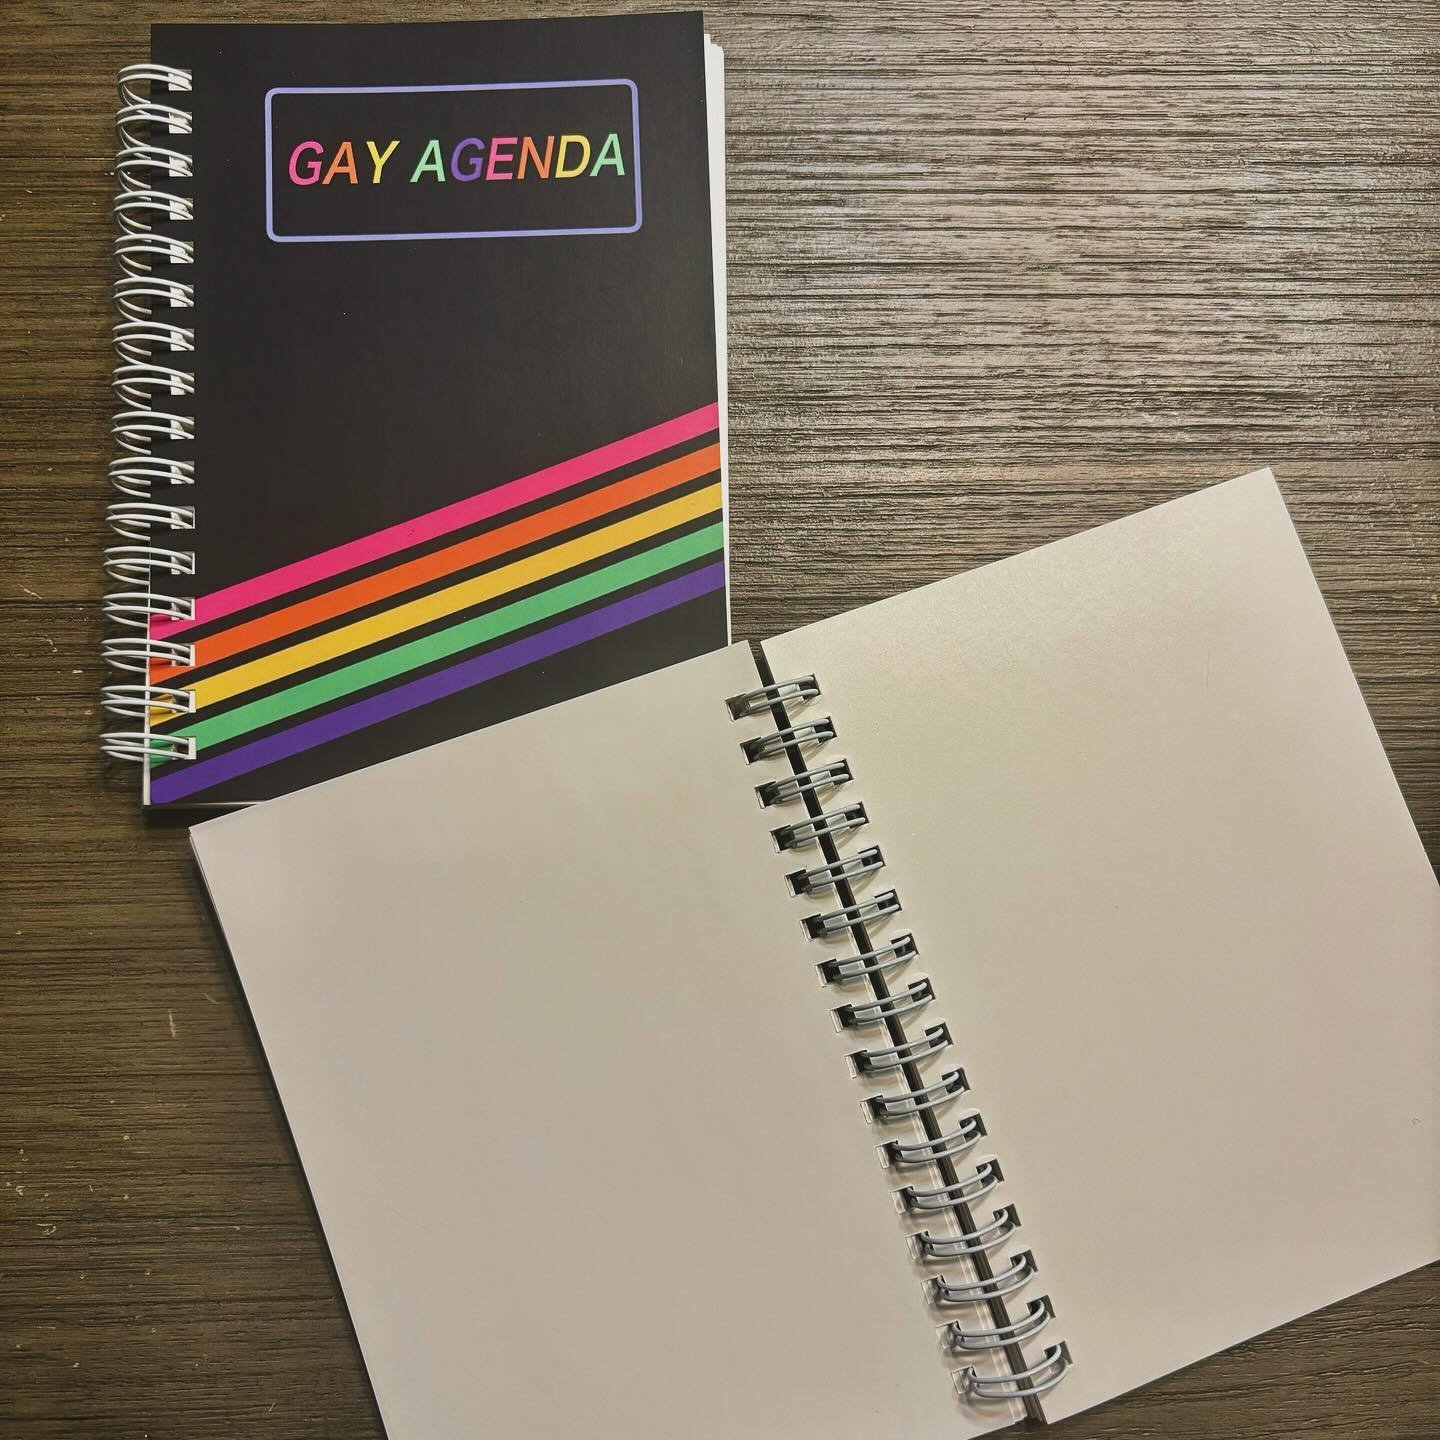 Do you love stickers and just don&rsquo;t want to commit to a place to put them yet? PUT THEM HERE! The pages of these notebooks act like sticker backing so you can collect all your faves in one place!!!

The size of this notebook is A6